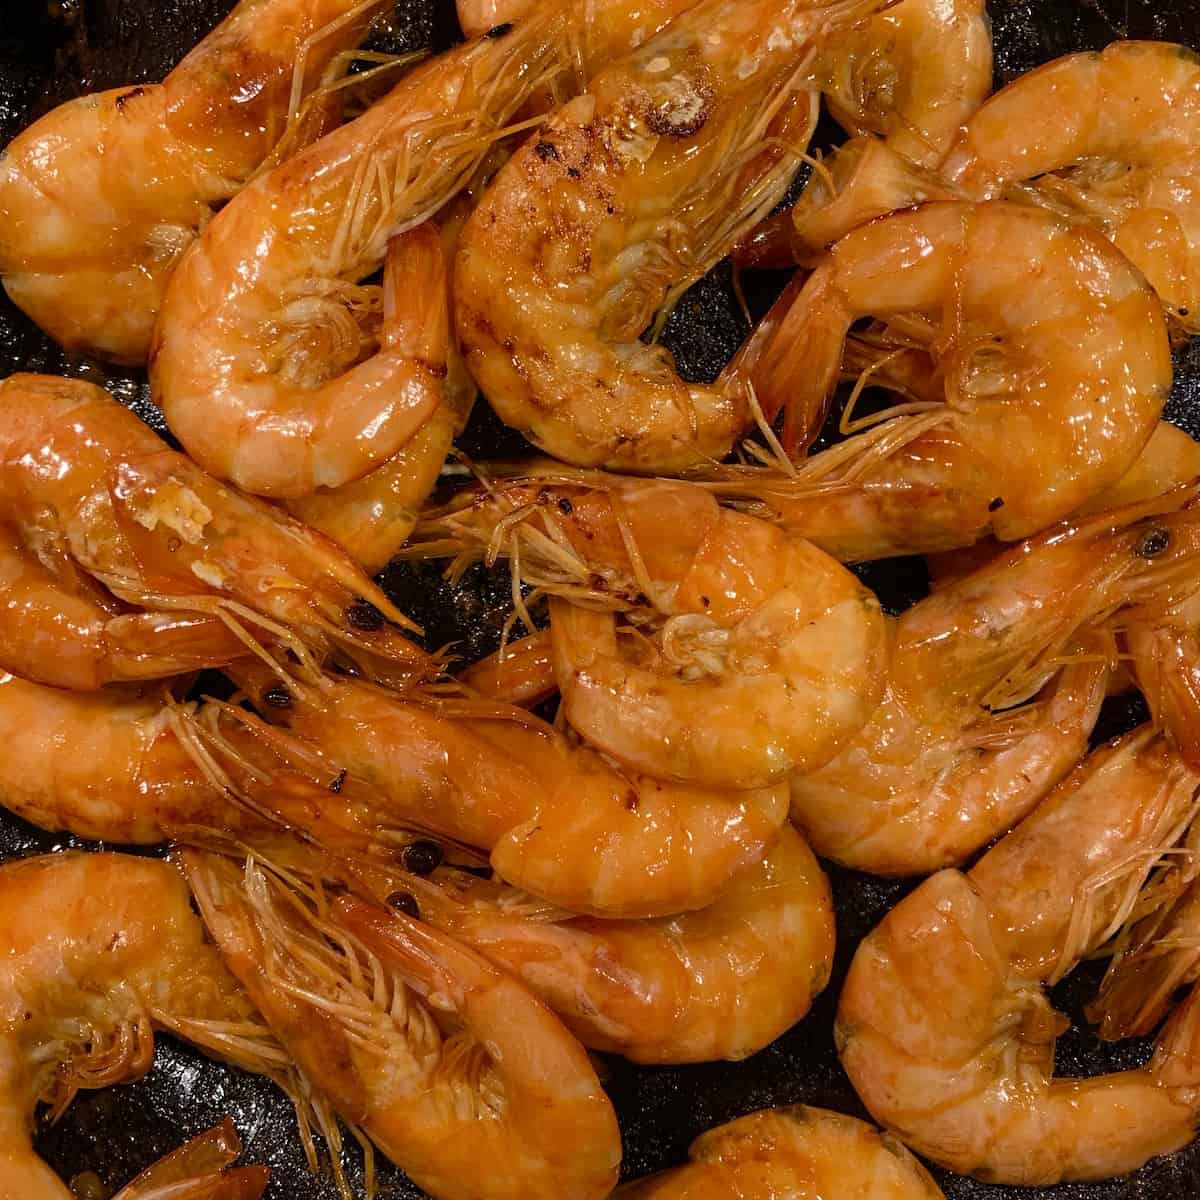 Cooked shrimps.